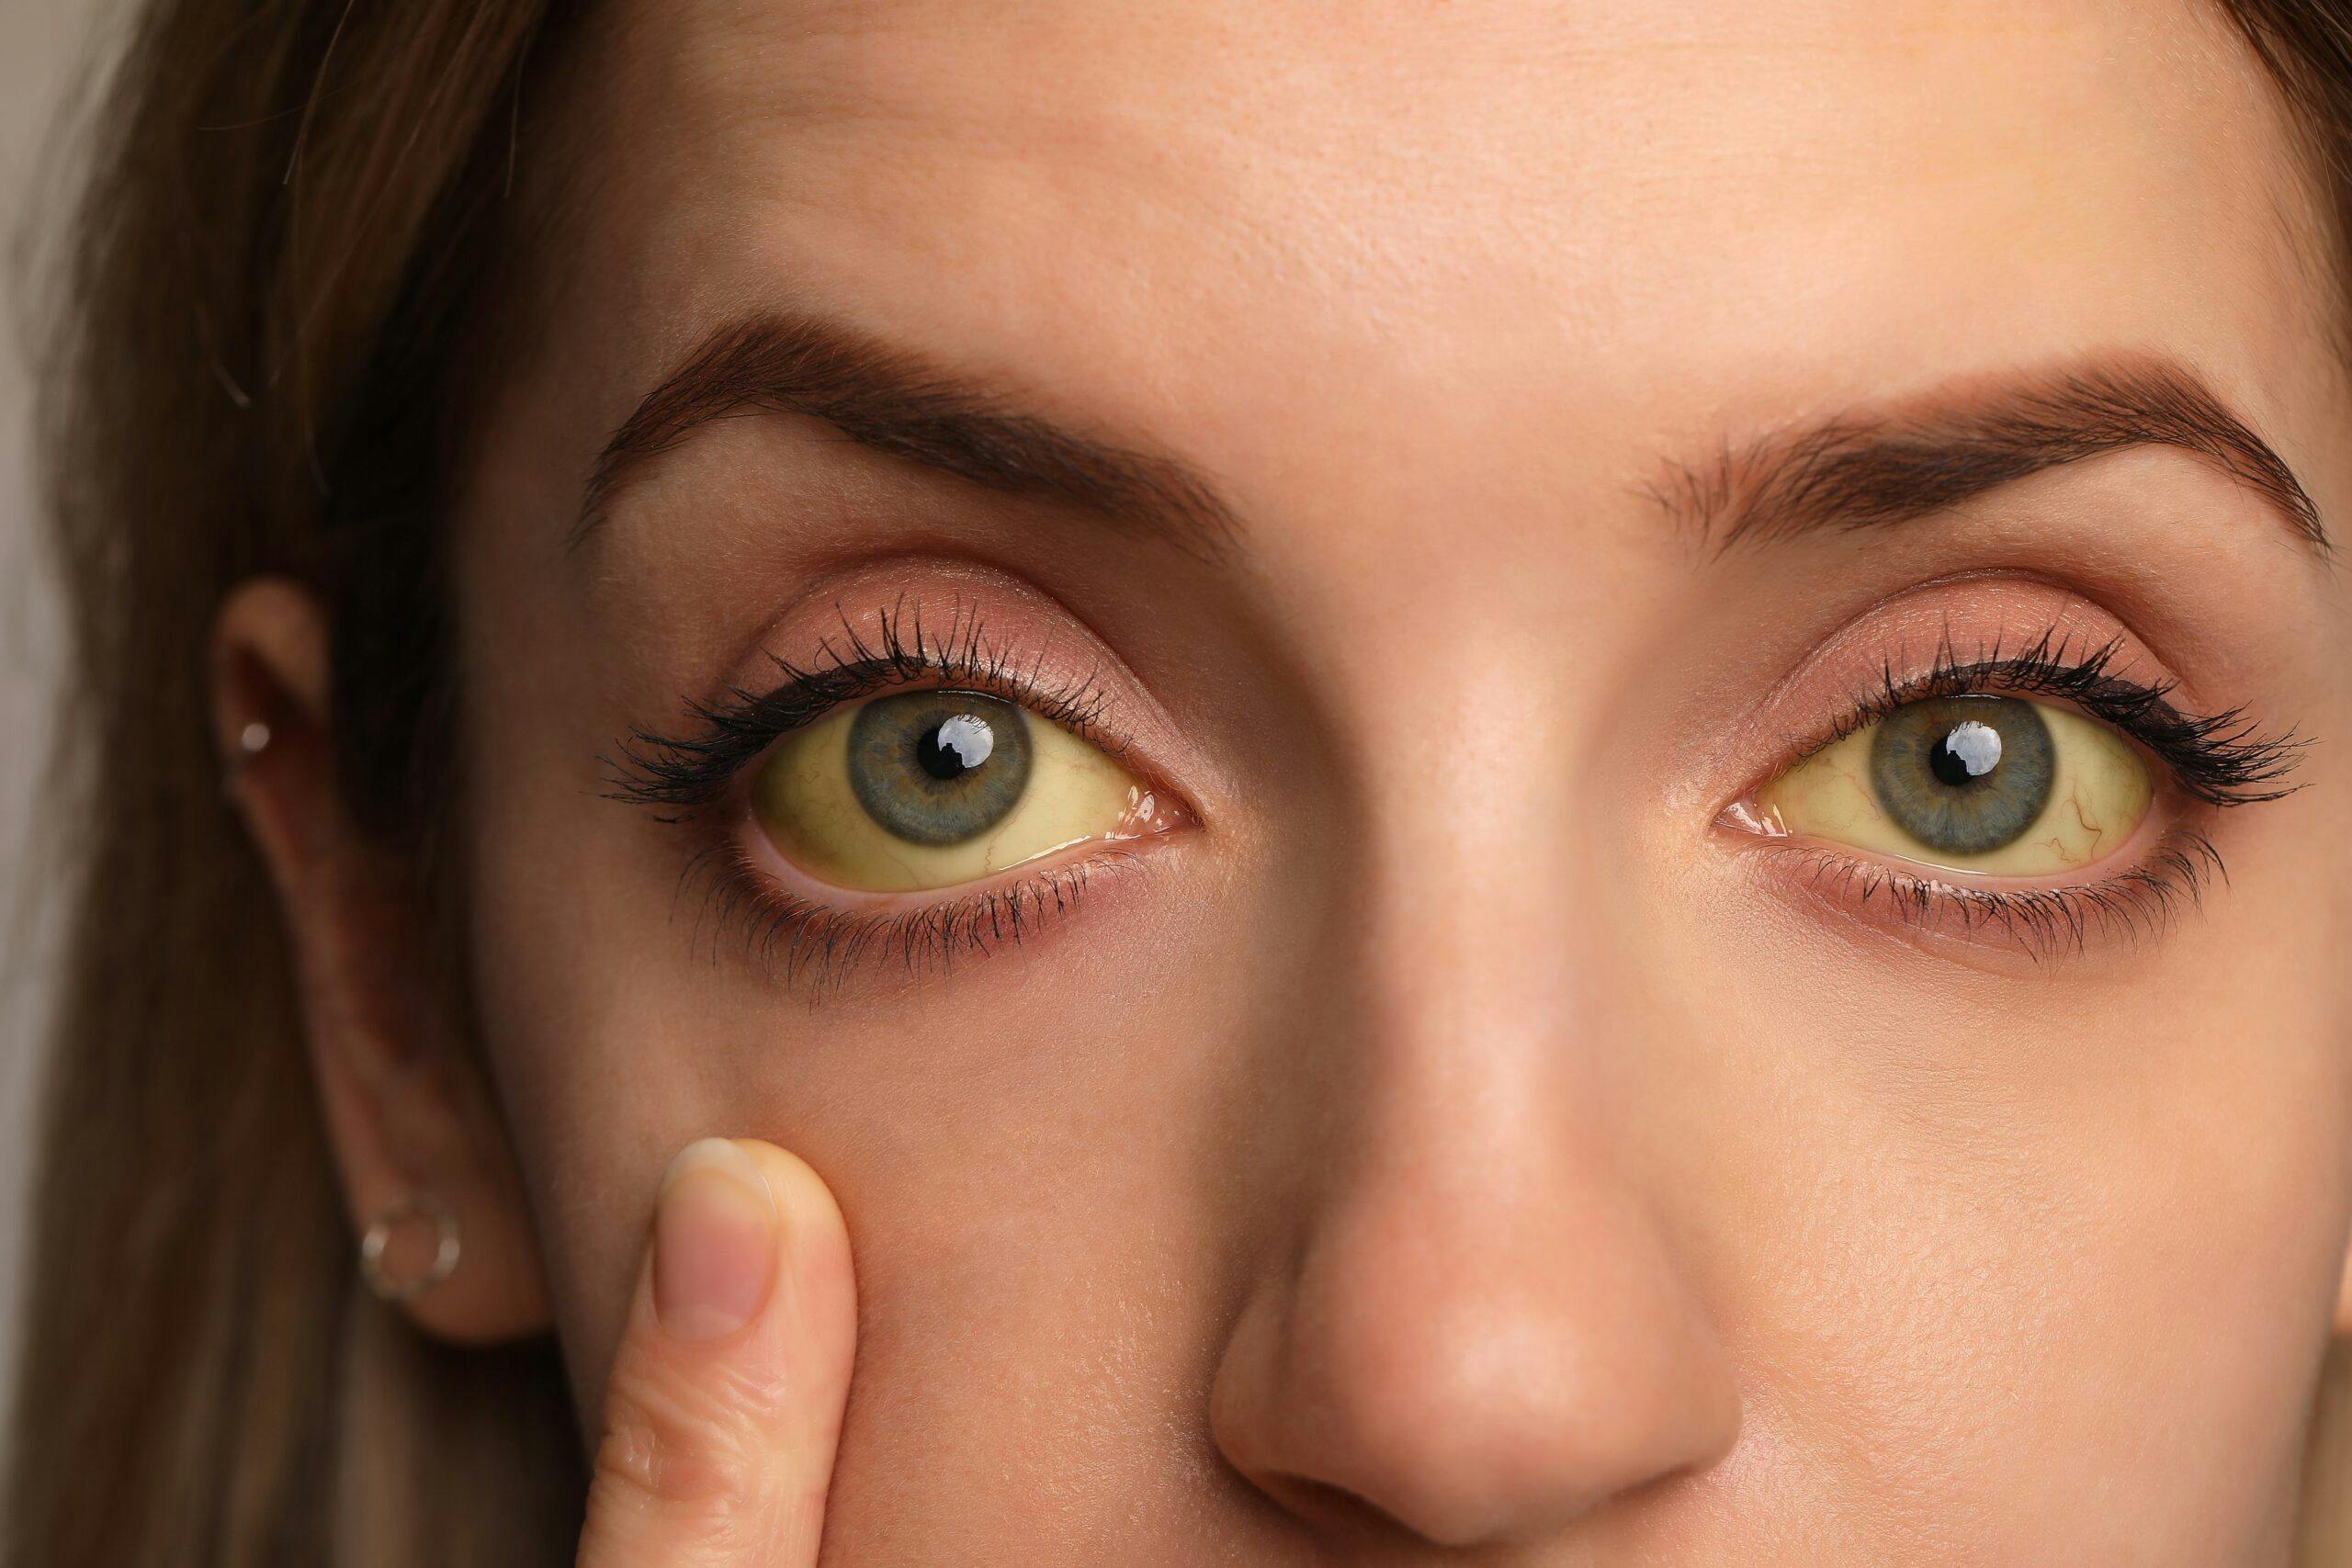 Can Drinking Alcohol Cause Yellow Eyes?